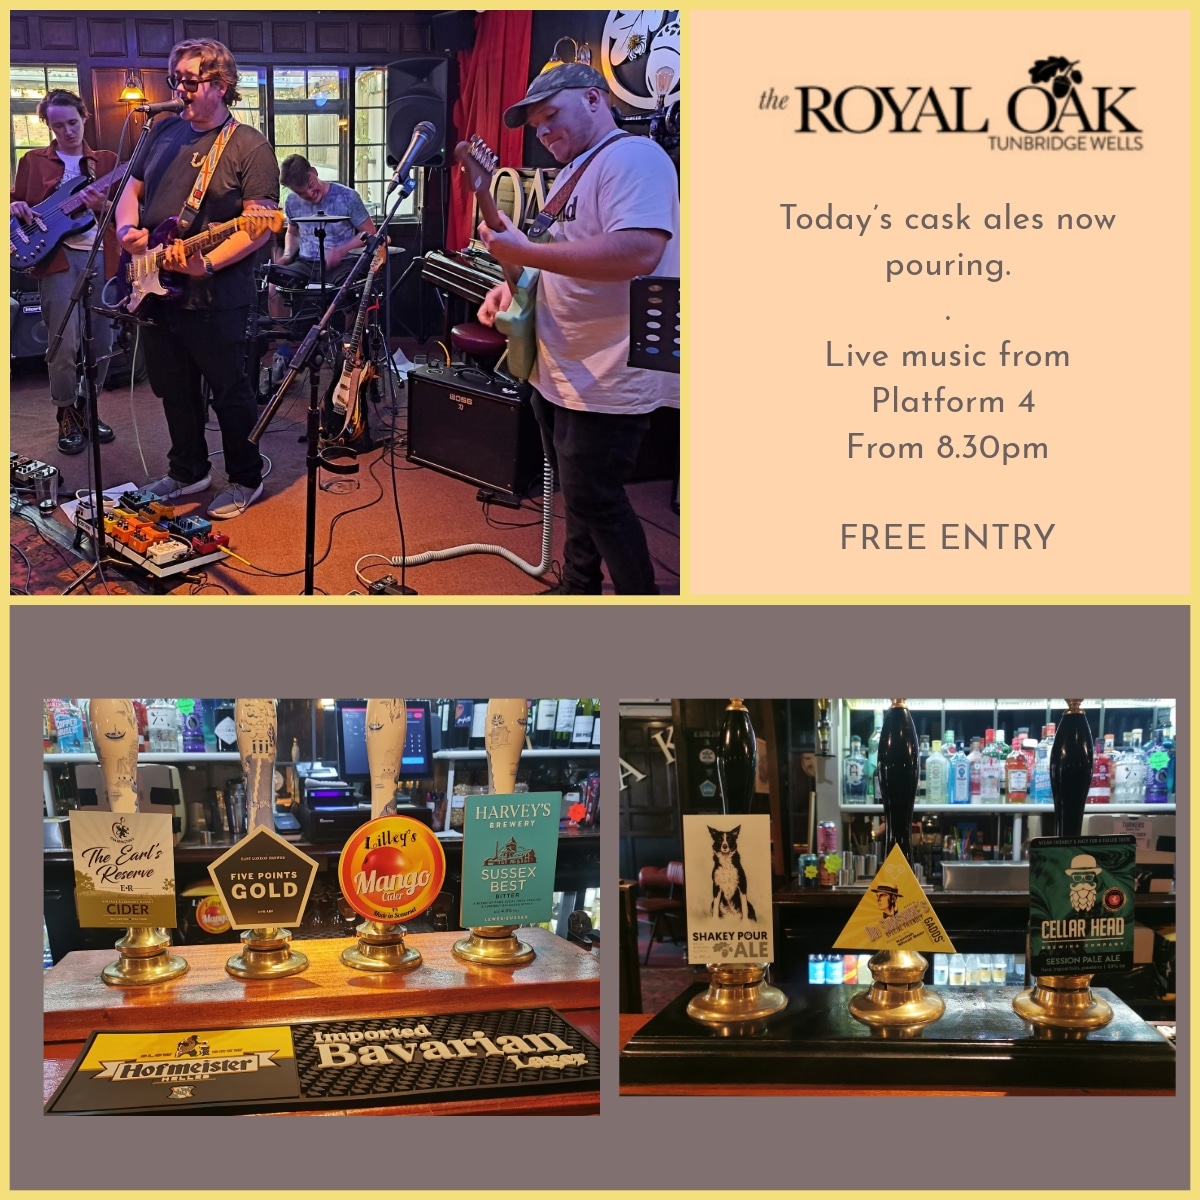 Today's cask ales now pouring.

Live music from 8.30pm with the fabulous Platform 4.  Free Entry

#twevents #twlivemusic #localmusic #livemusic #harveysbrewery #fivepointsbrewingco #gaddsbrewery #shakeypourpale #westkentcamra